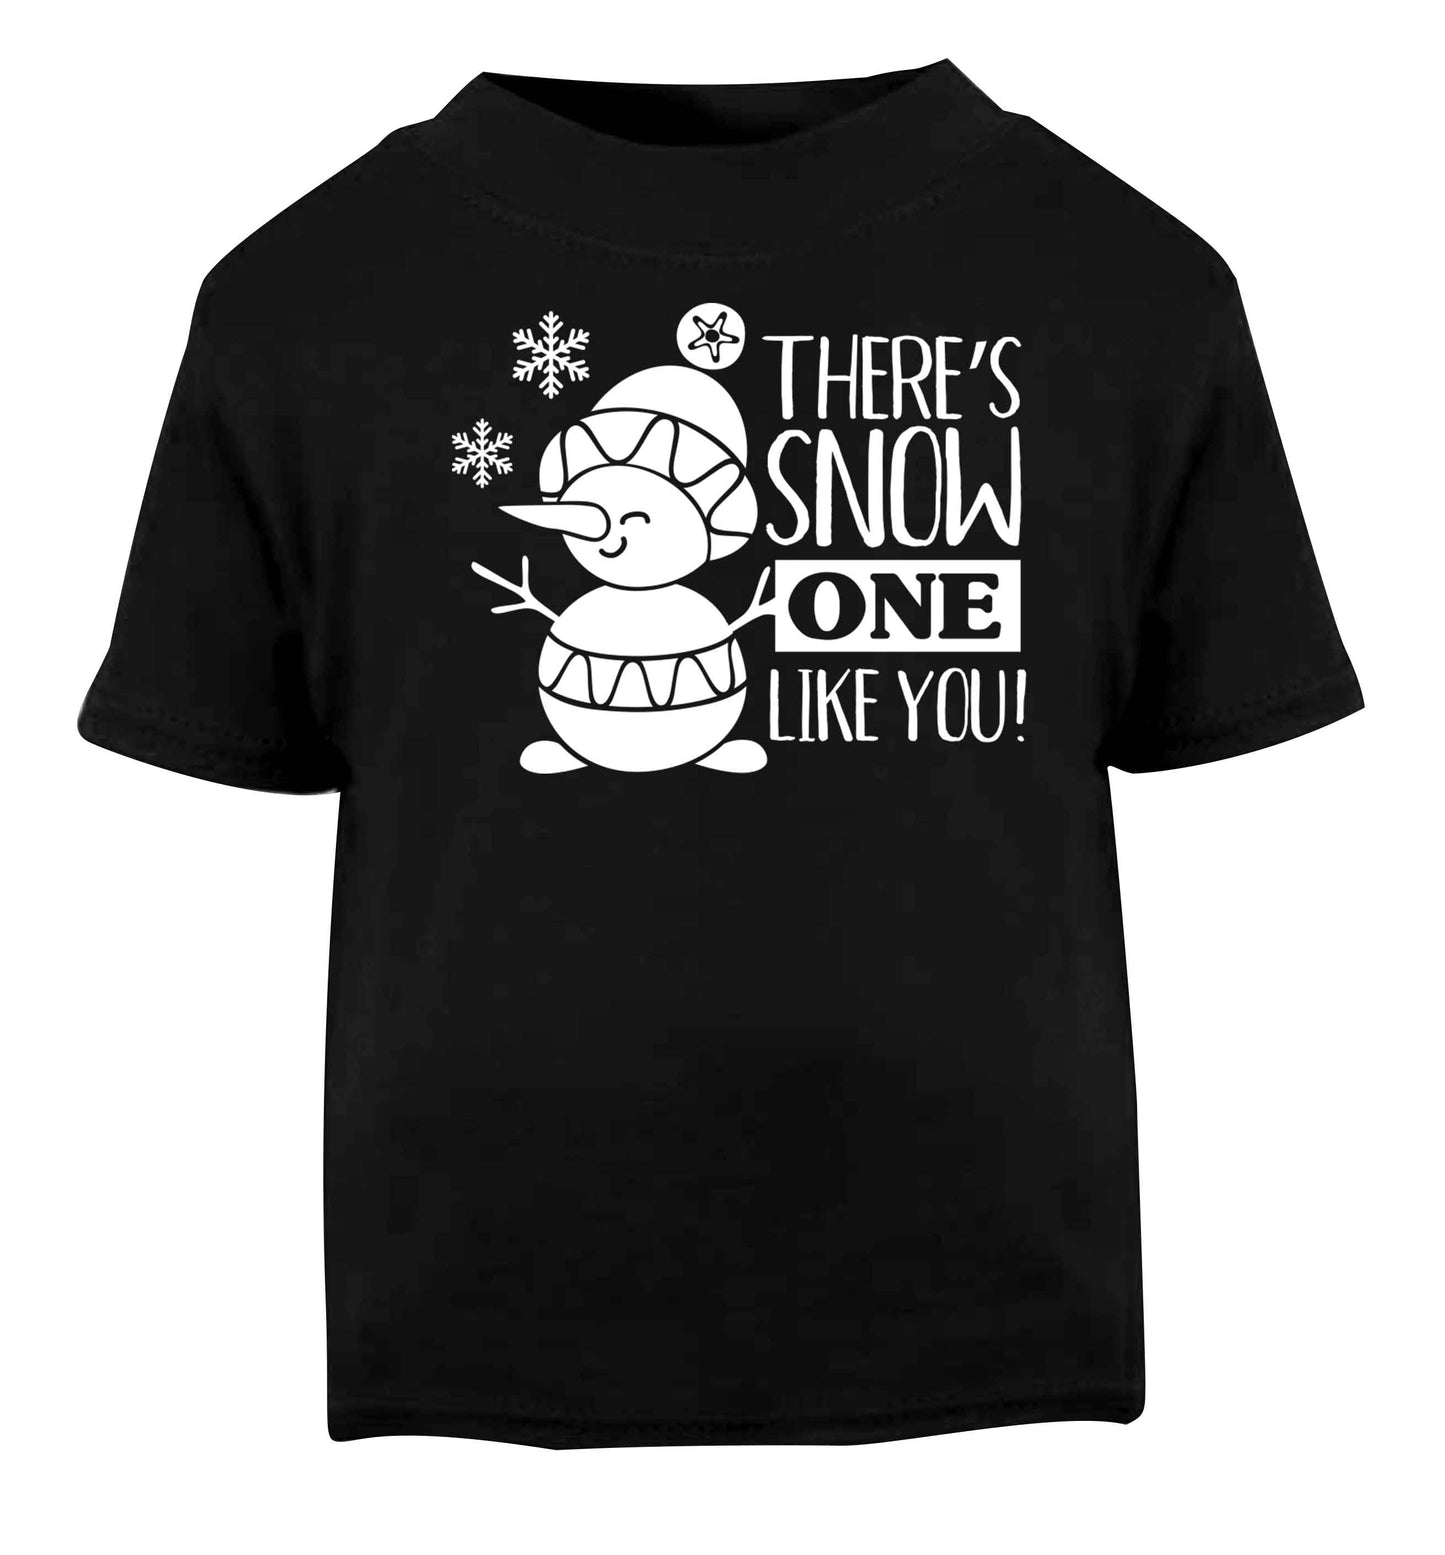 There's snow one like you Black baby toddler Tshirt 2 years